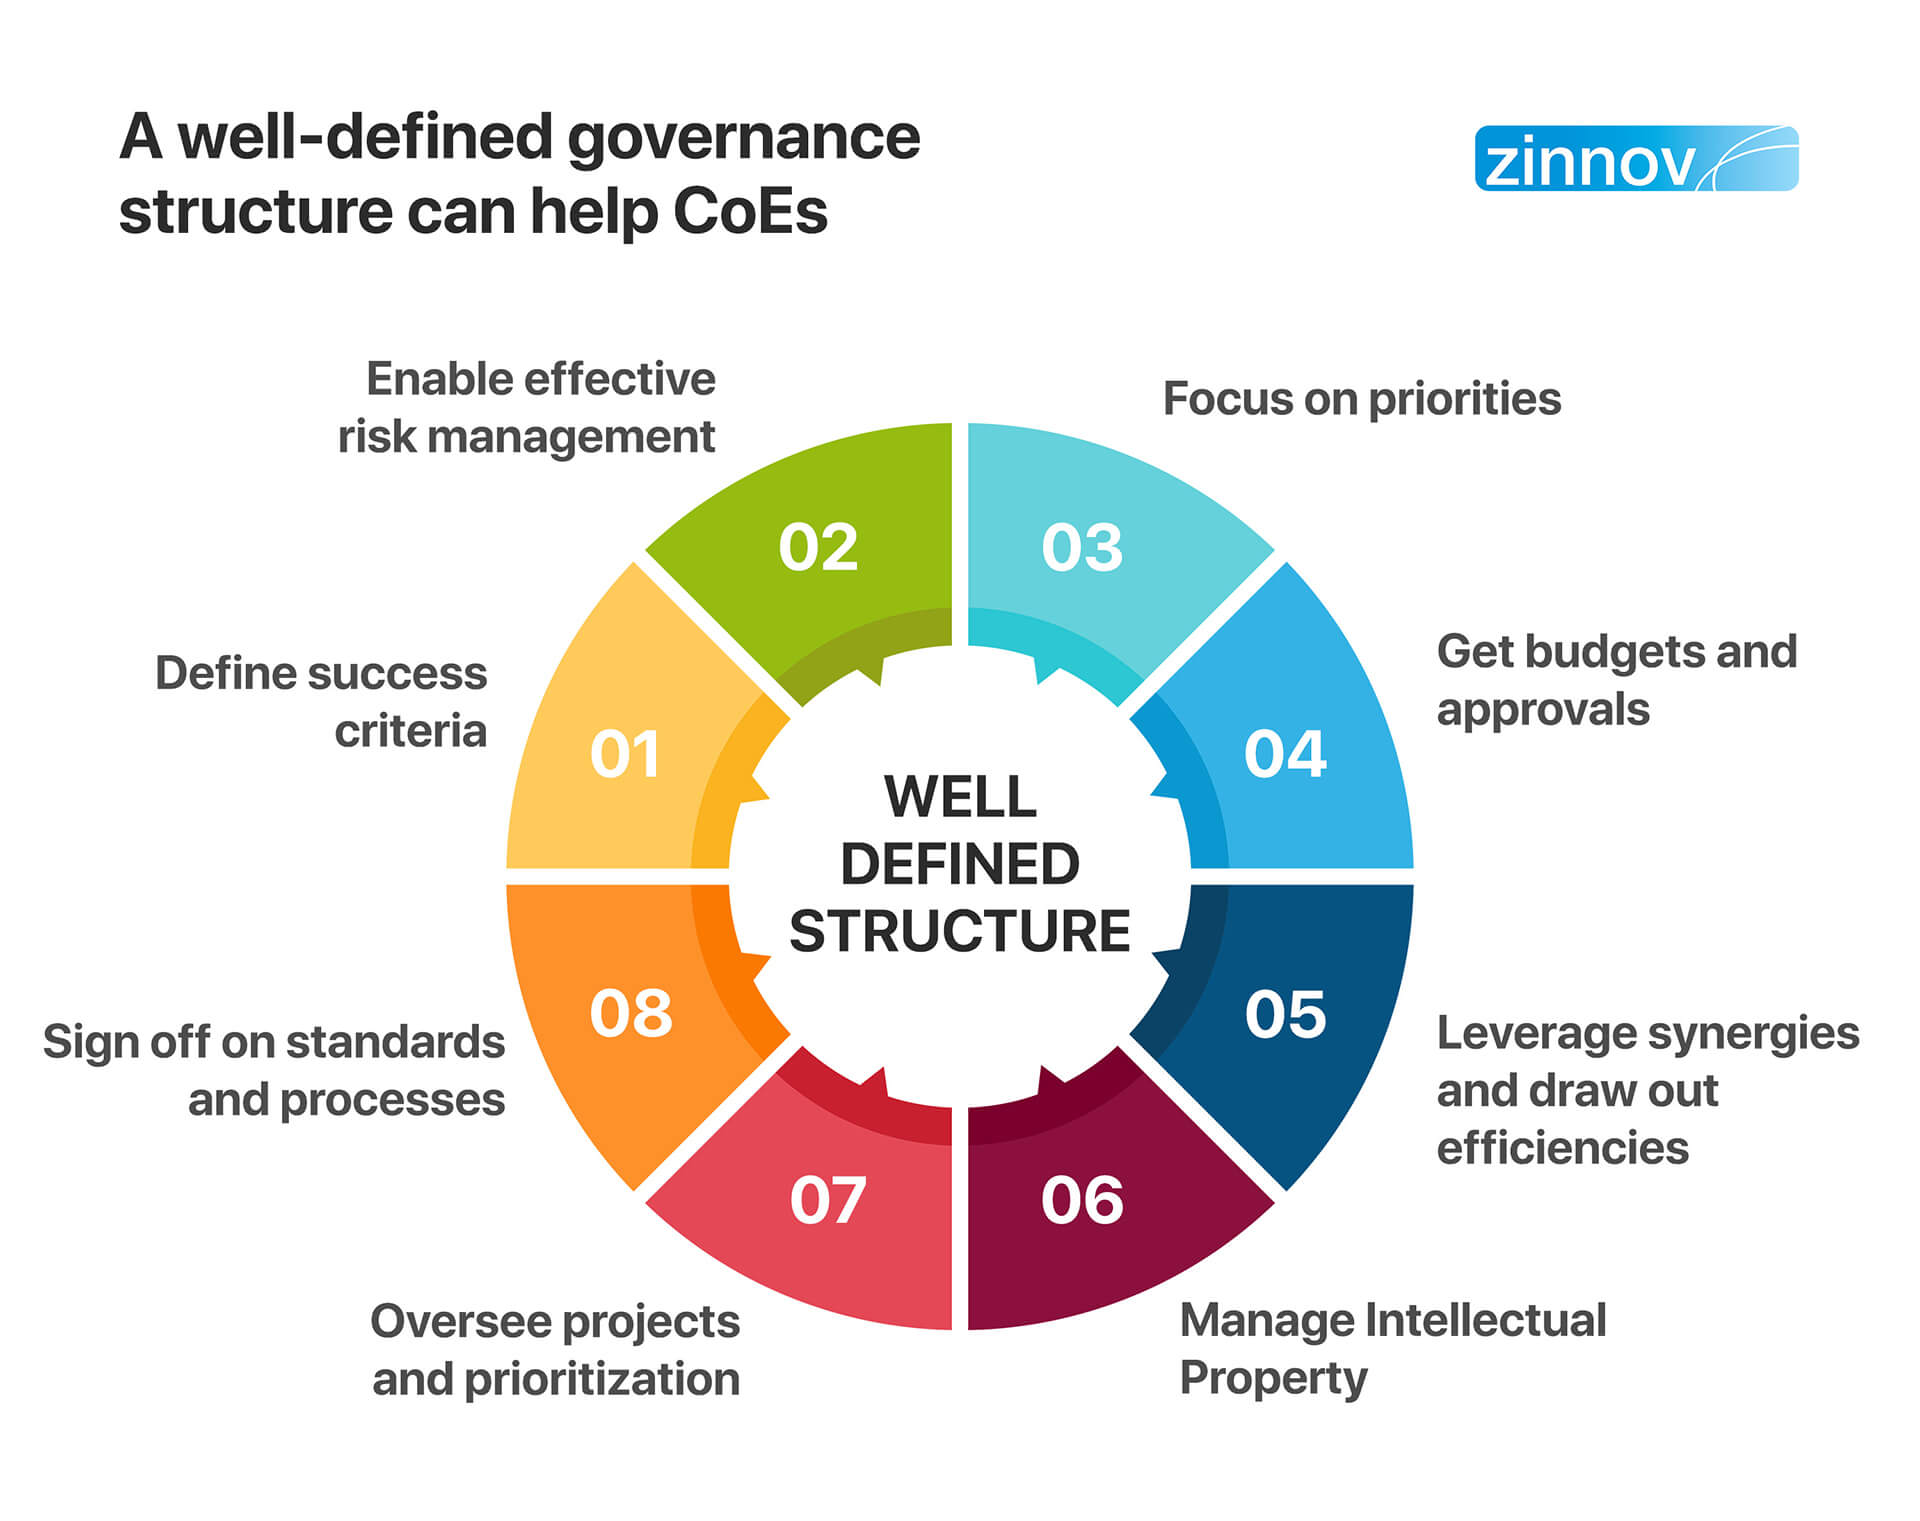 Governance Structure That Can Help COES